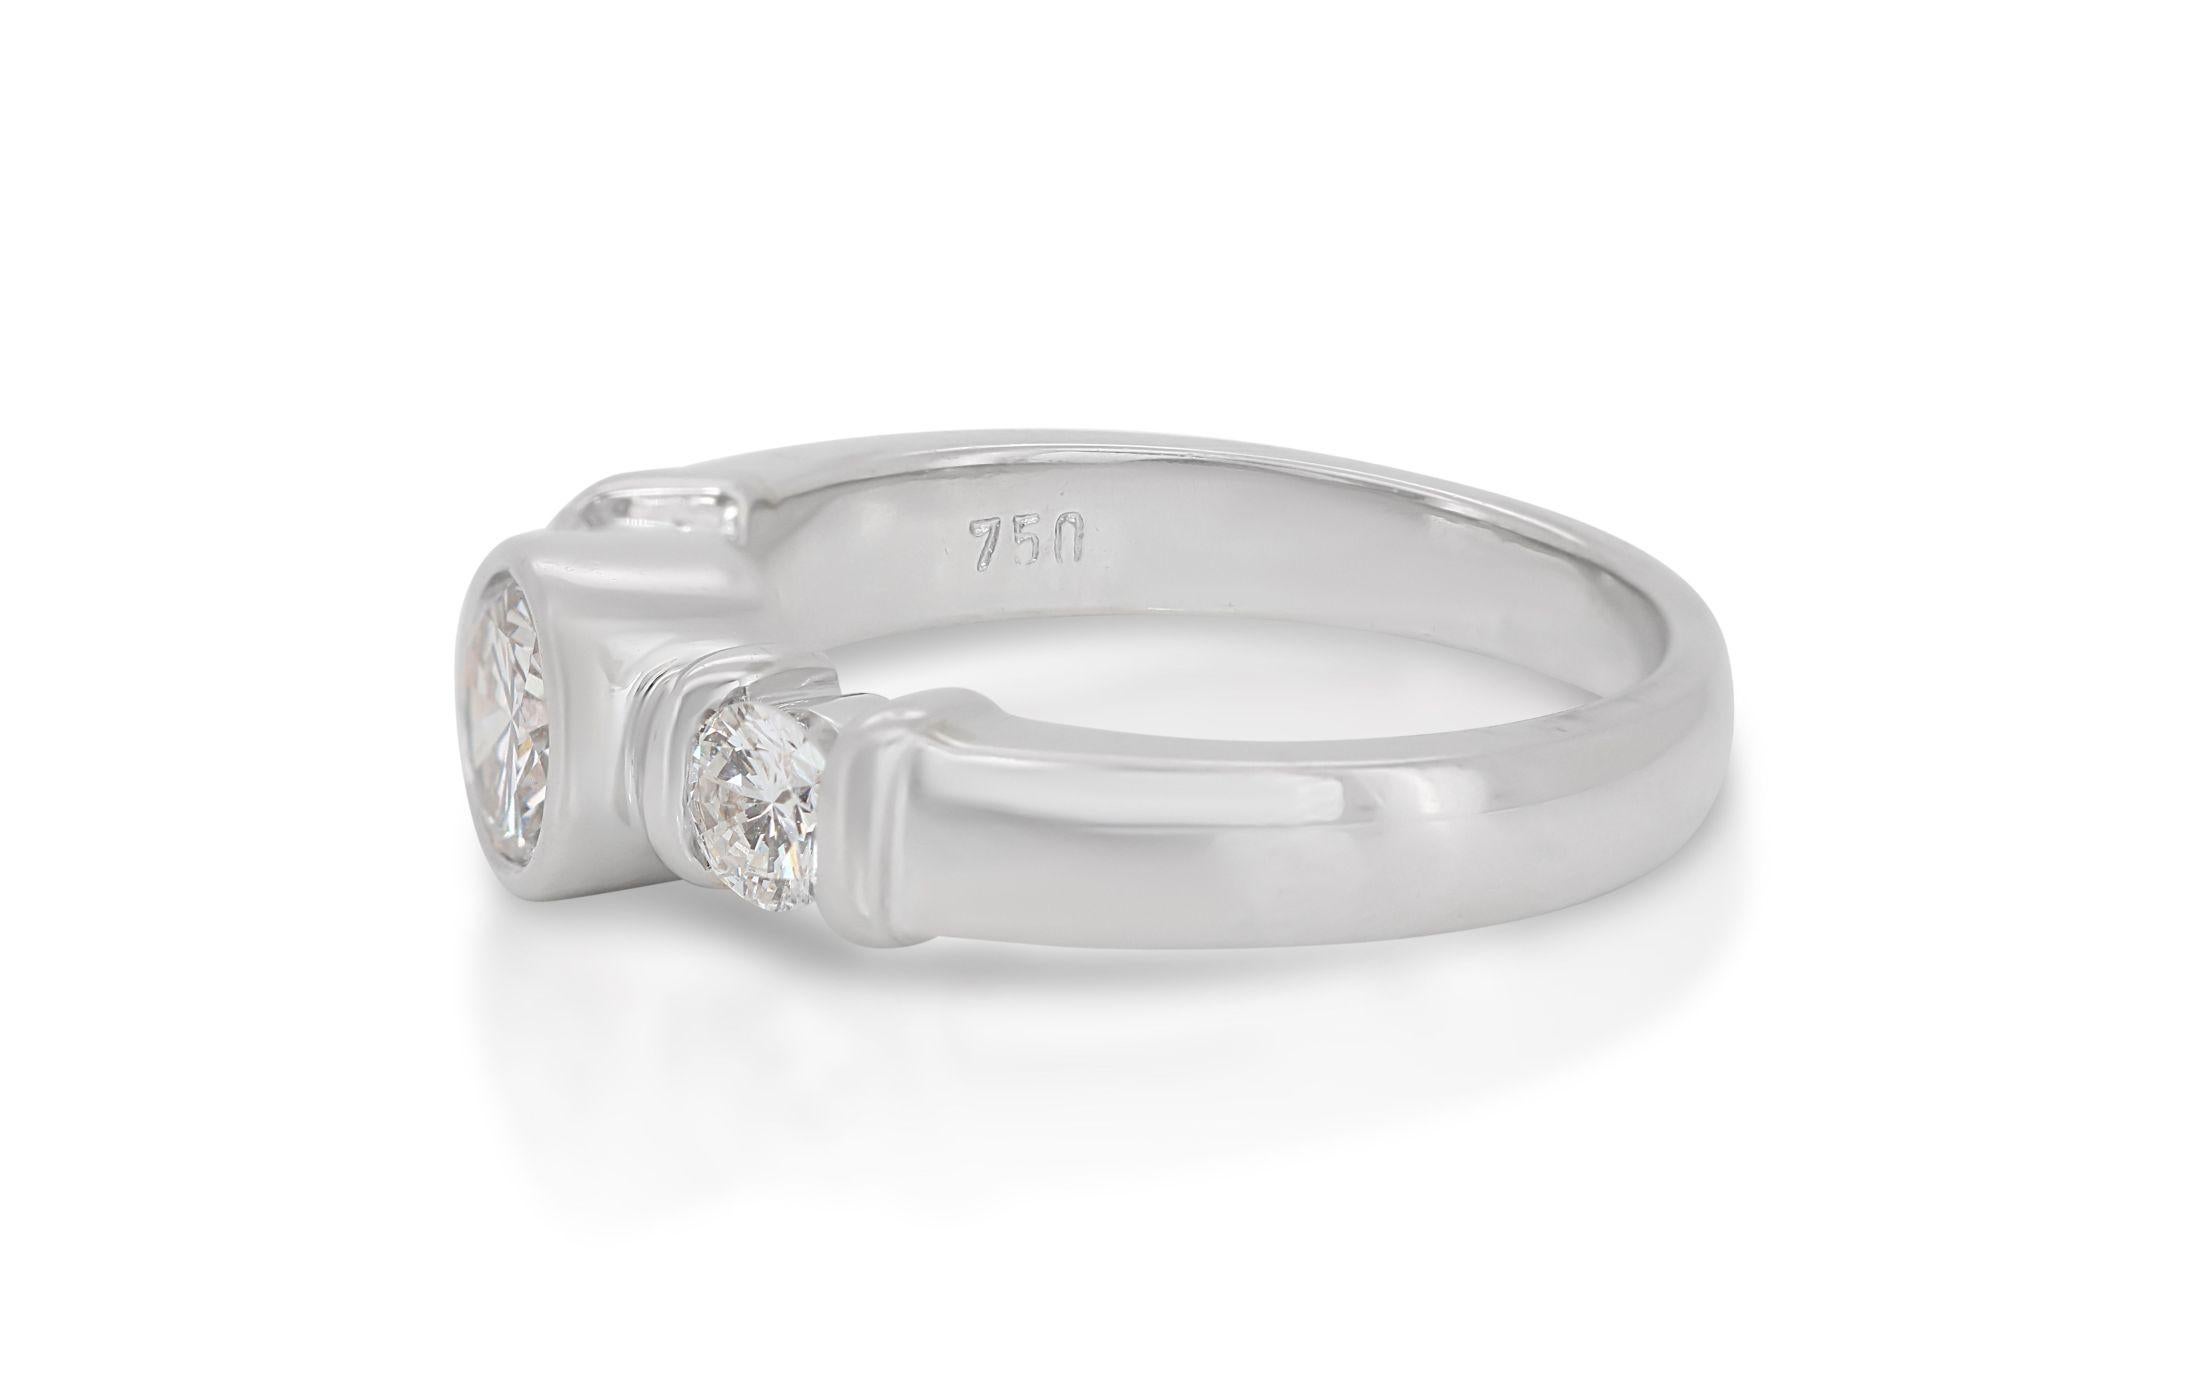 Captivating 0.60ct 3-stone Diamond Ring set in 18K White Gold For Sale 3